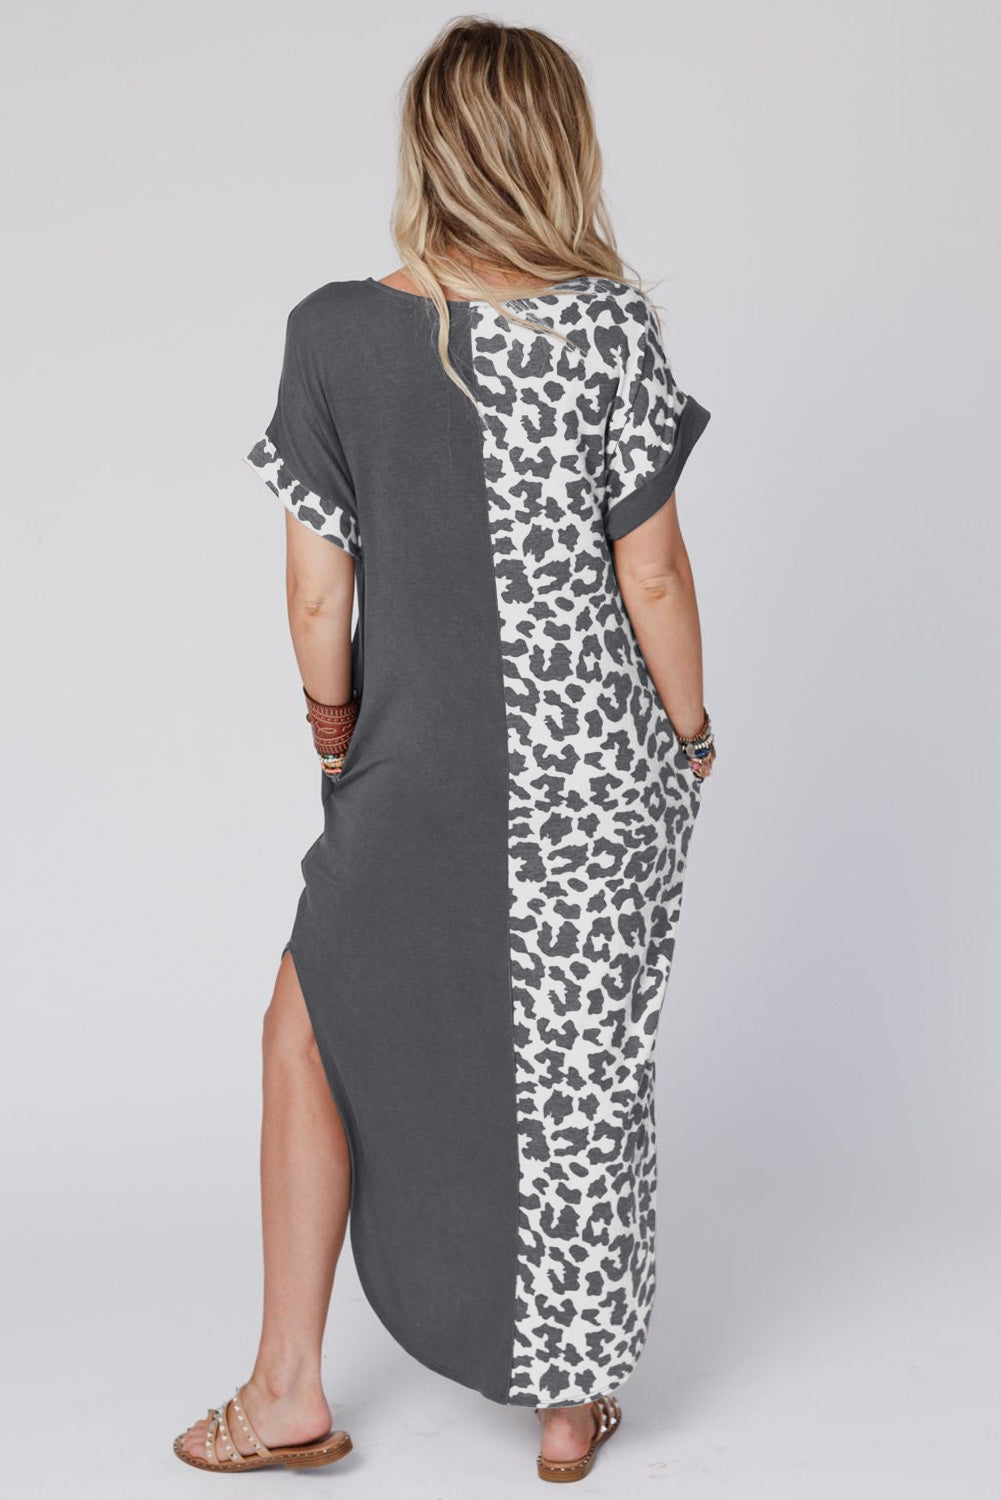 Black Contrast Solid Leopard Short Sleeve T-shirt Dress with Slits Blue Zone Planet